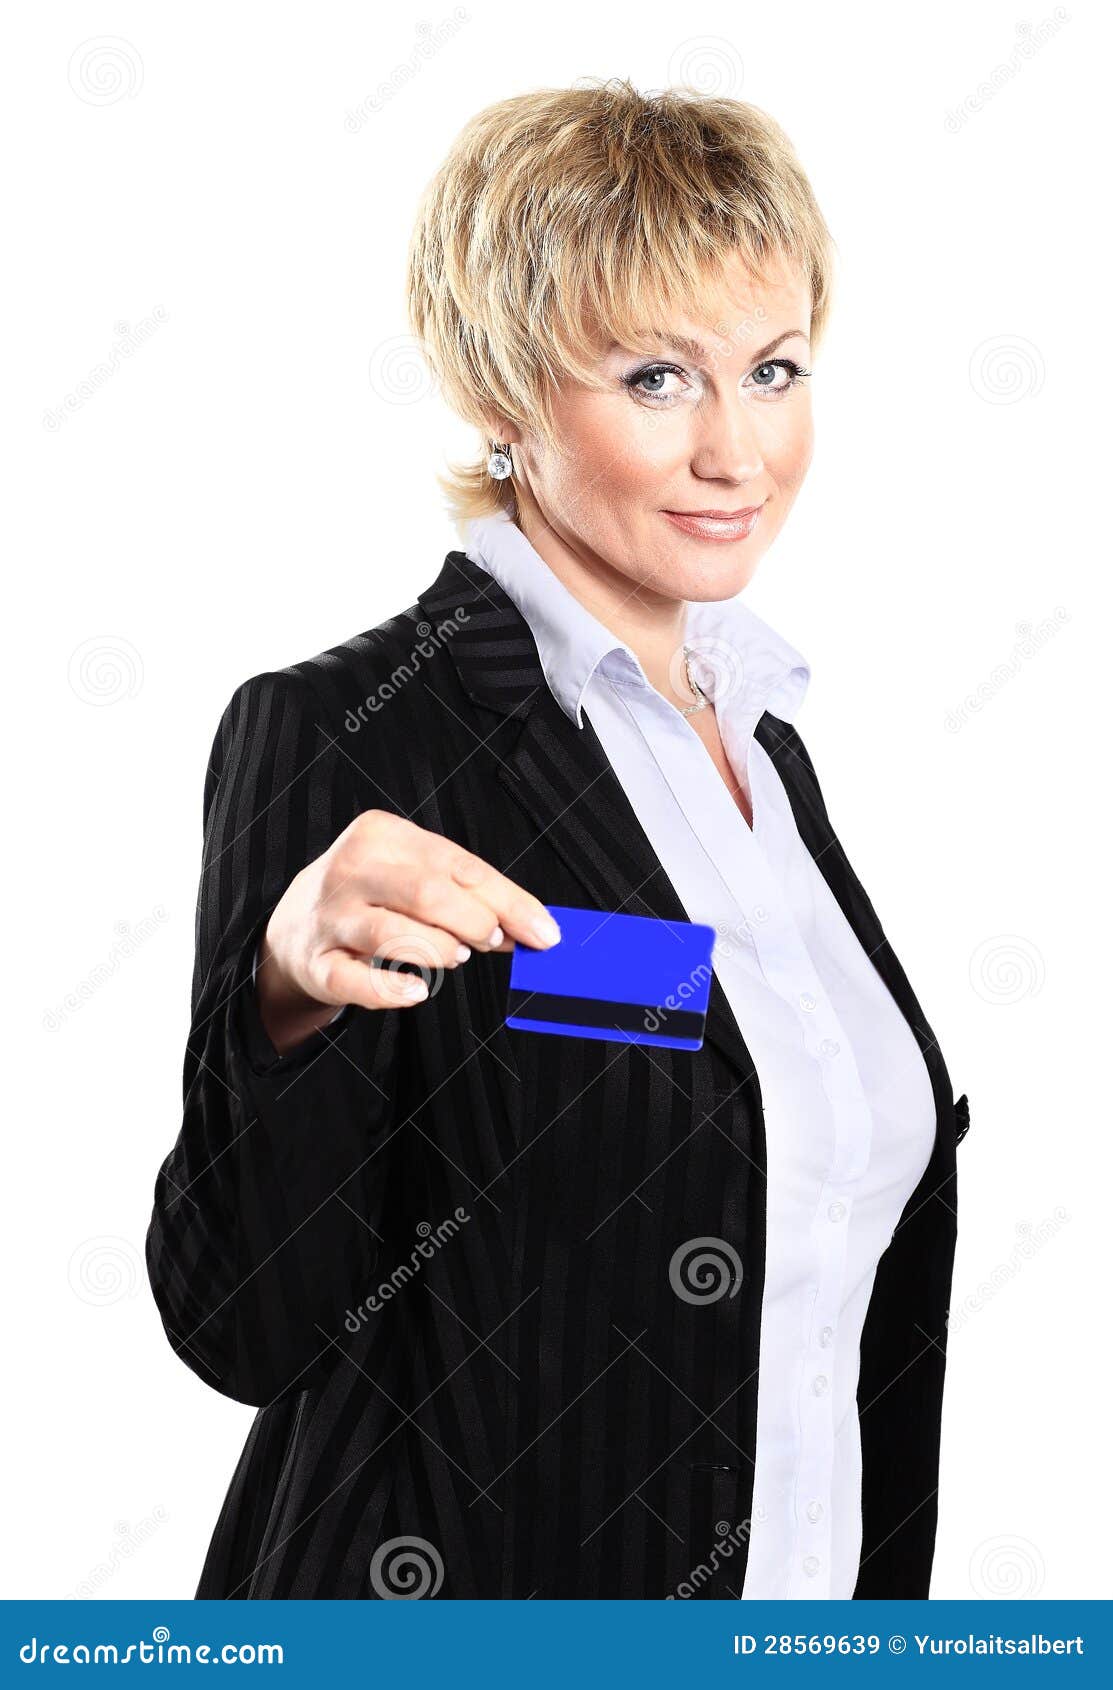 Business Woman In Her 40s Royalty Free Stock Images - Image: 28569639